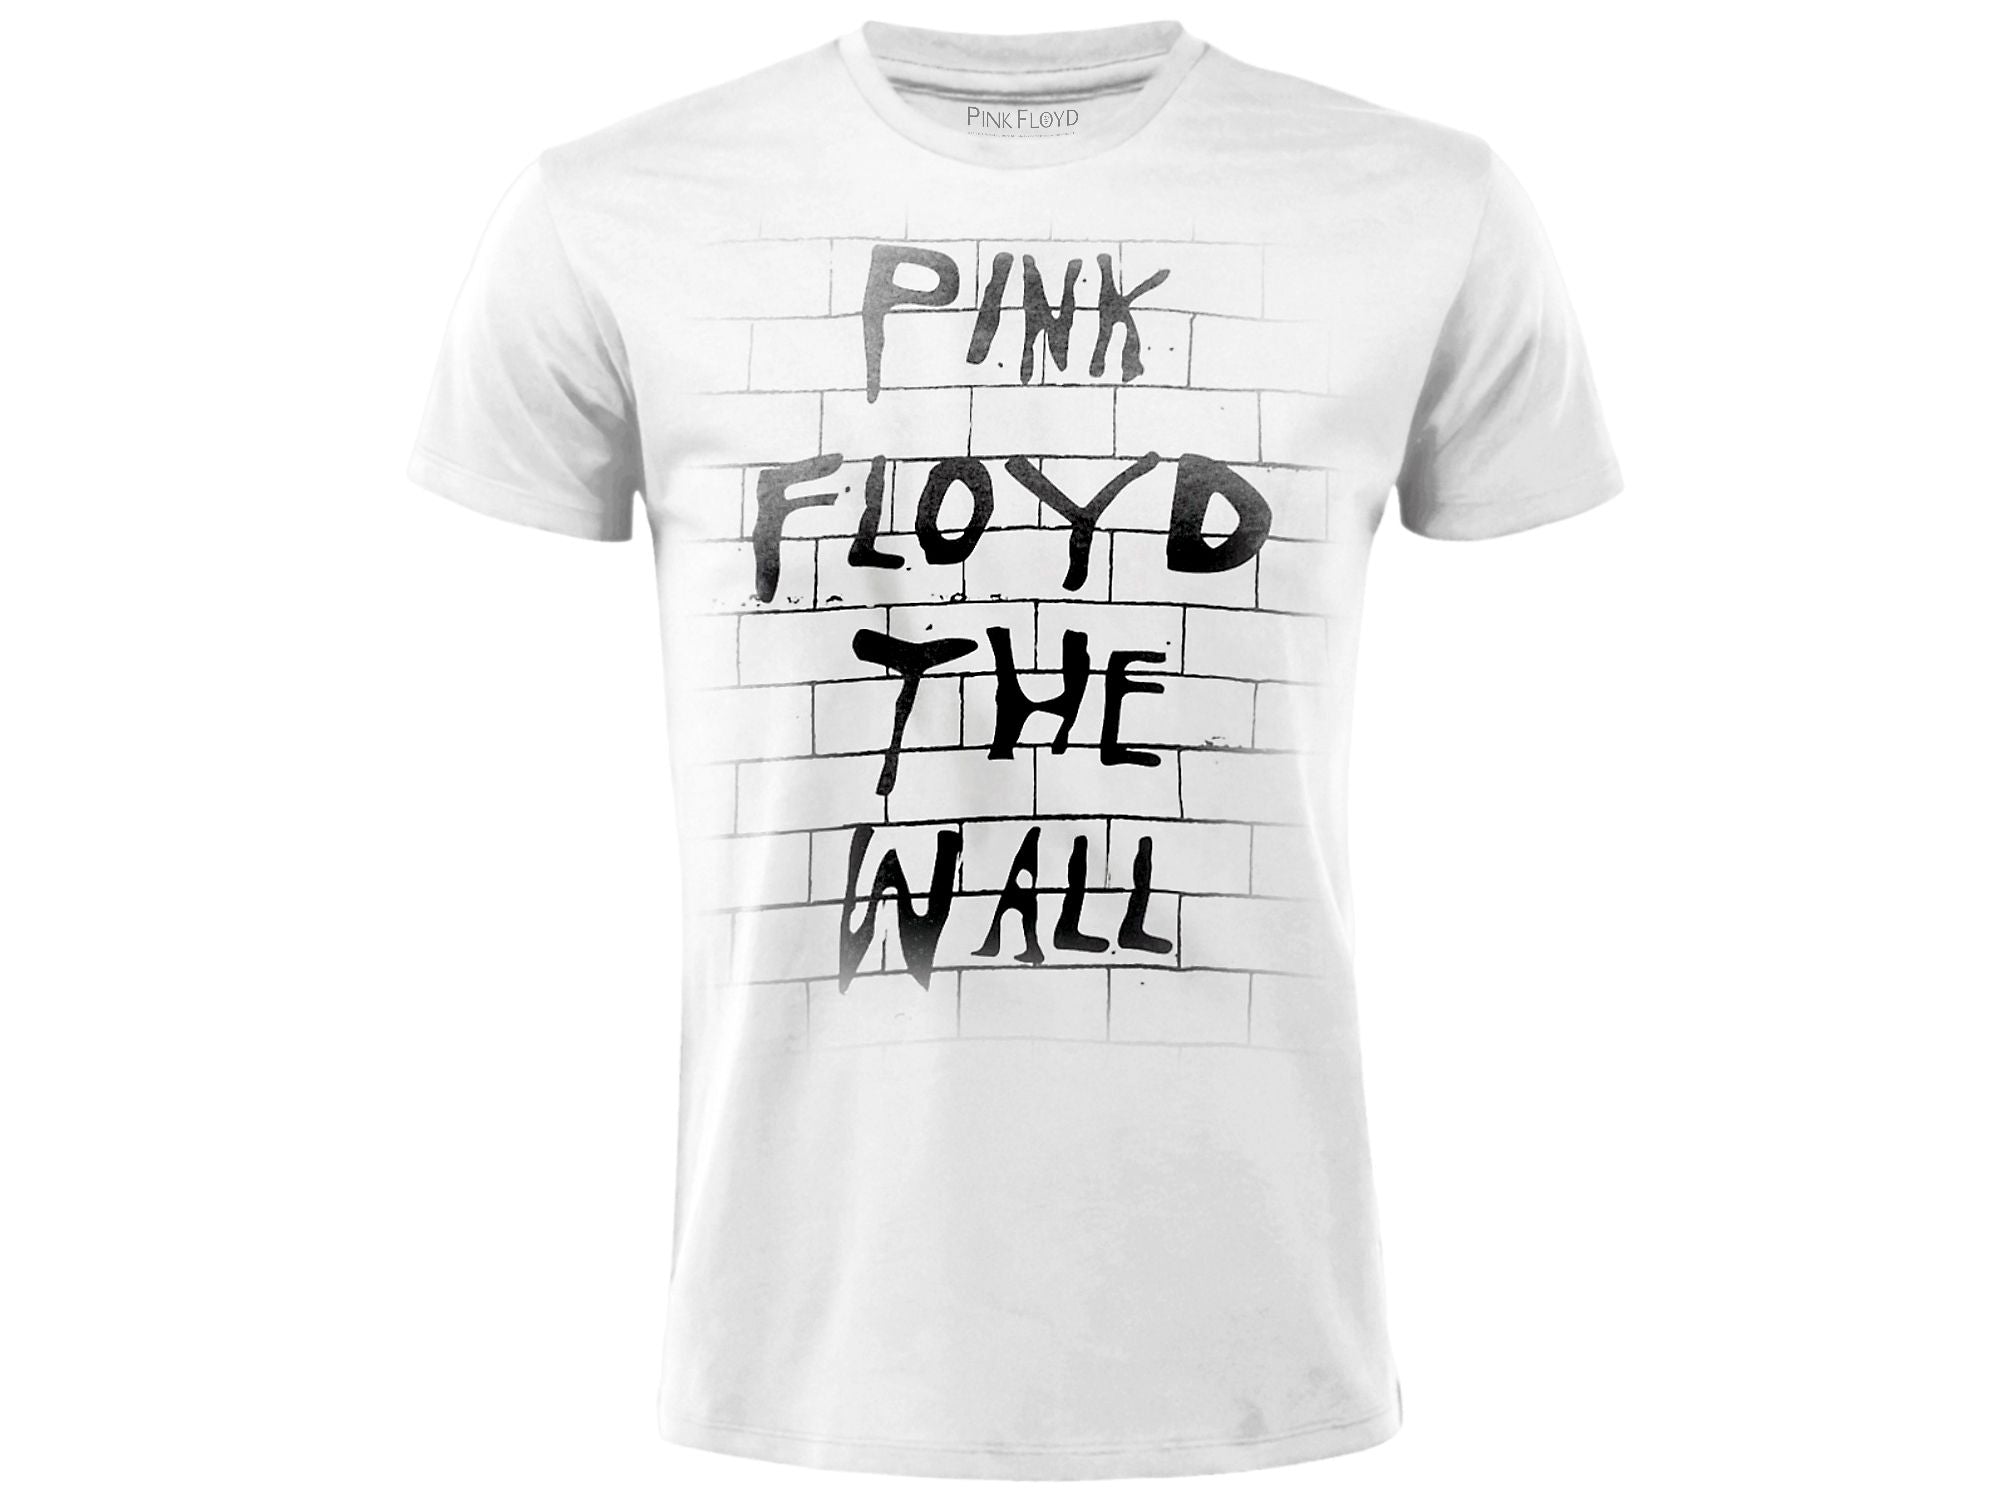 PINK FLOYD : THE WALL T-shirt S bianca - Disponibile in 2/3 giorni lavorativi GED